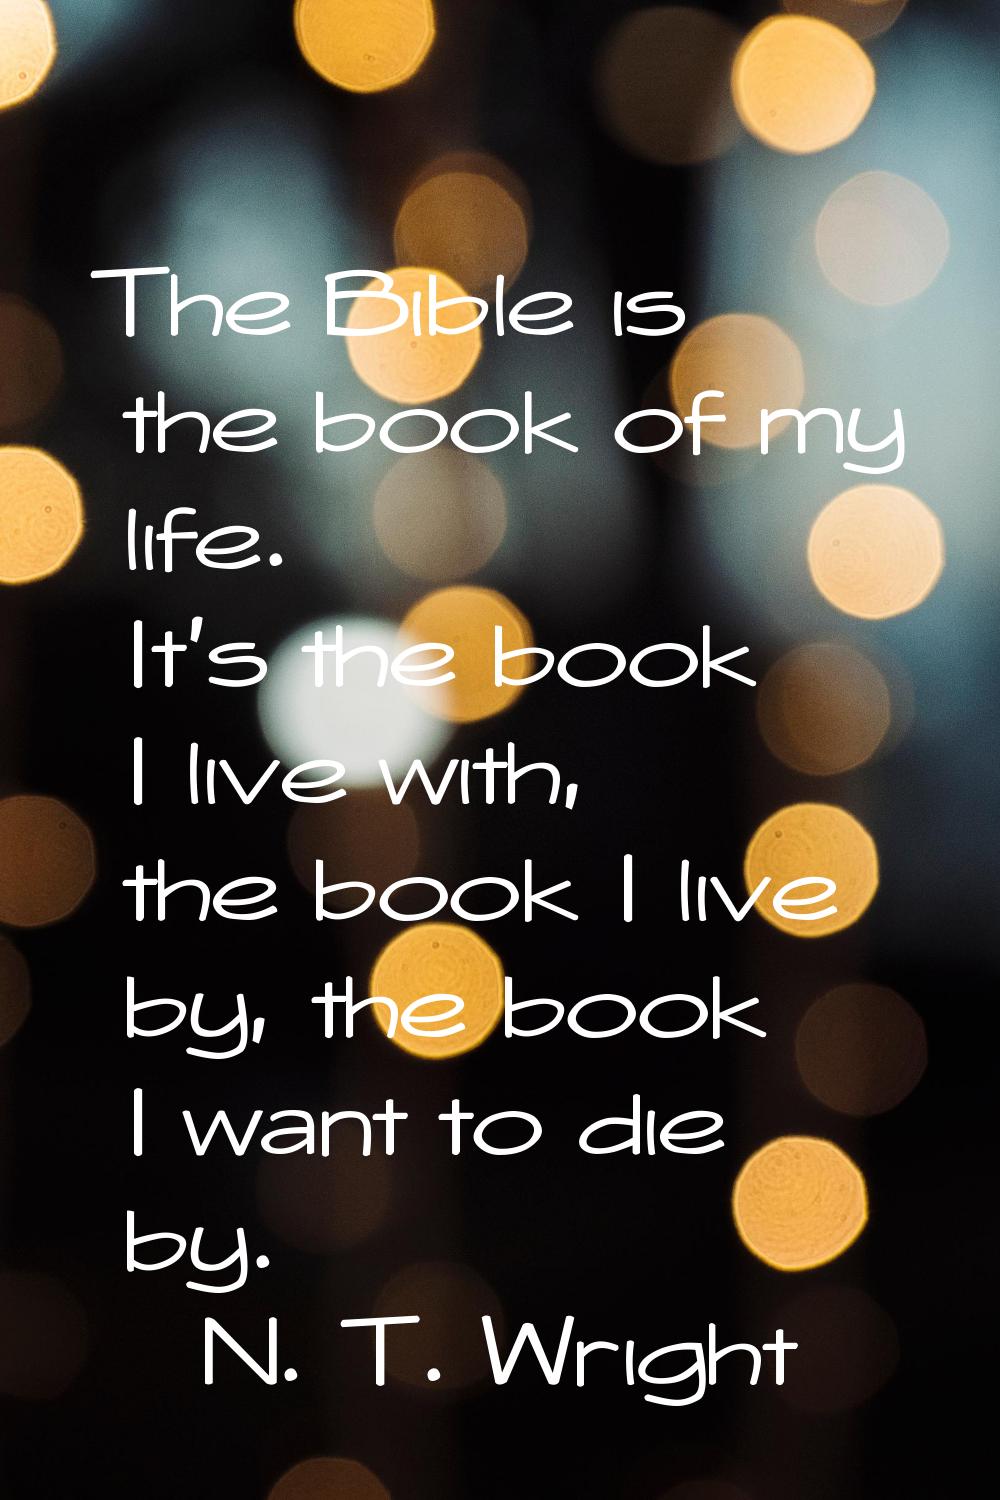 The Bible is the book of my life. It's the book I live with, the book I live by, the book I want to